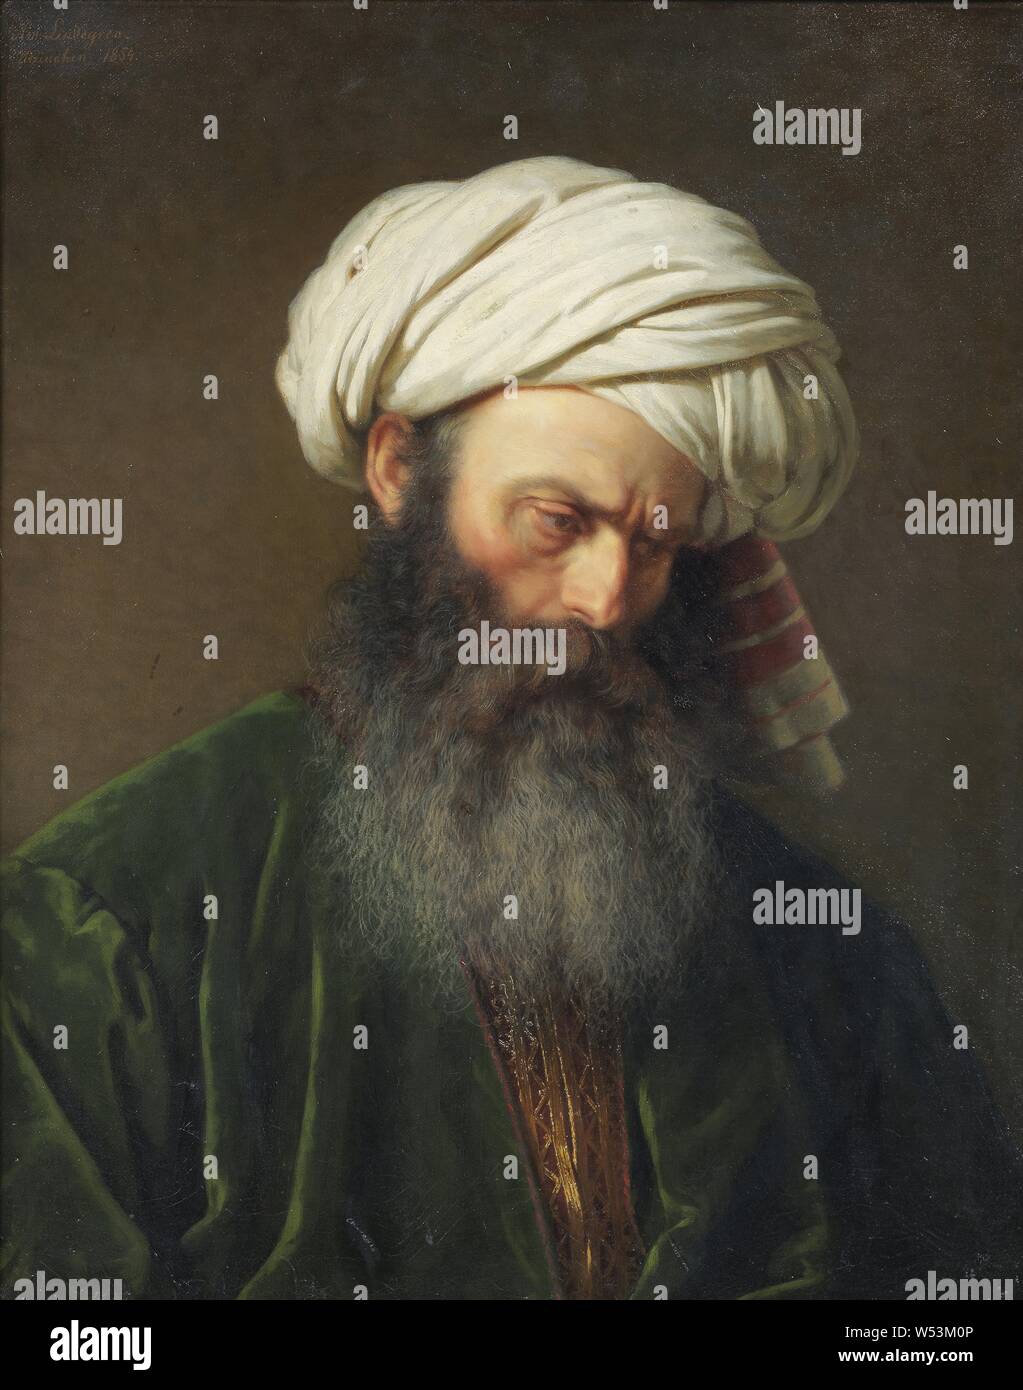 Amalia Lindegren, Turkhufvud English, Study of a Man in Turkish Dress, Study of man in Turkish costume, 1854, Oil on canvas, Height, 73.5 cm (28.9 inches), Width, 58.5 cm, (23 inch), Signed, Am Lindegren Munich 1854, above left Stock Photo